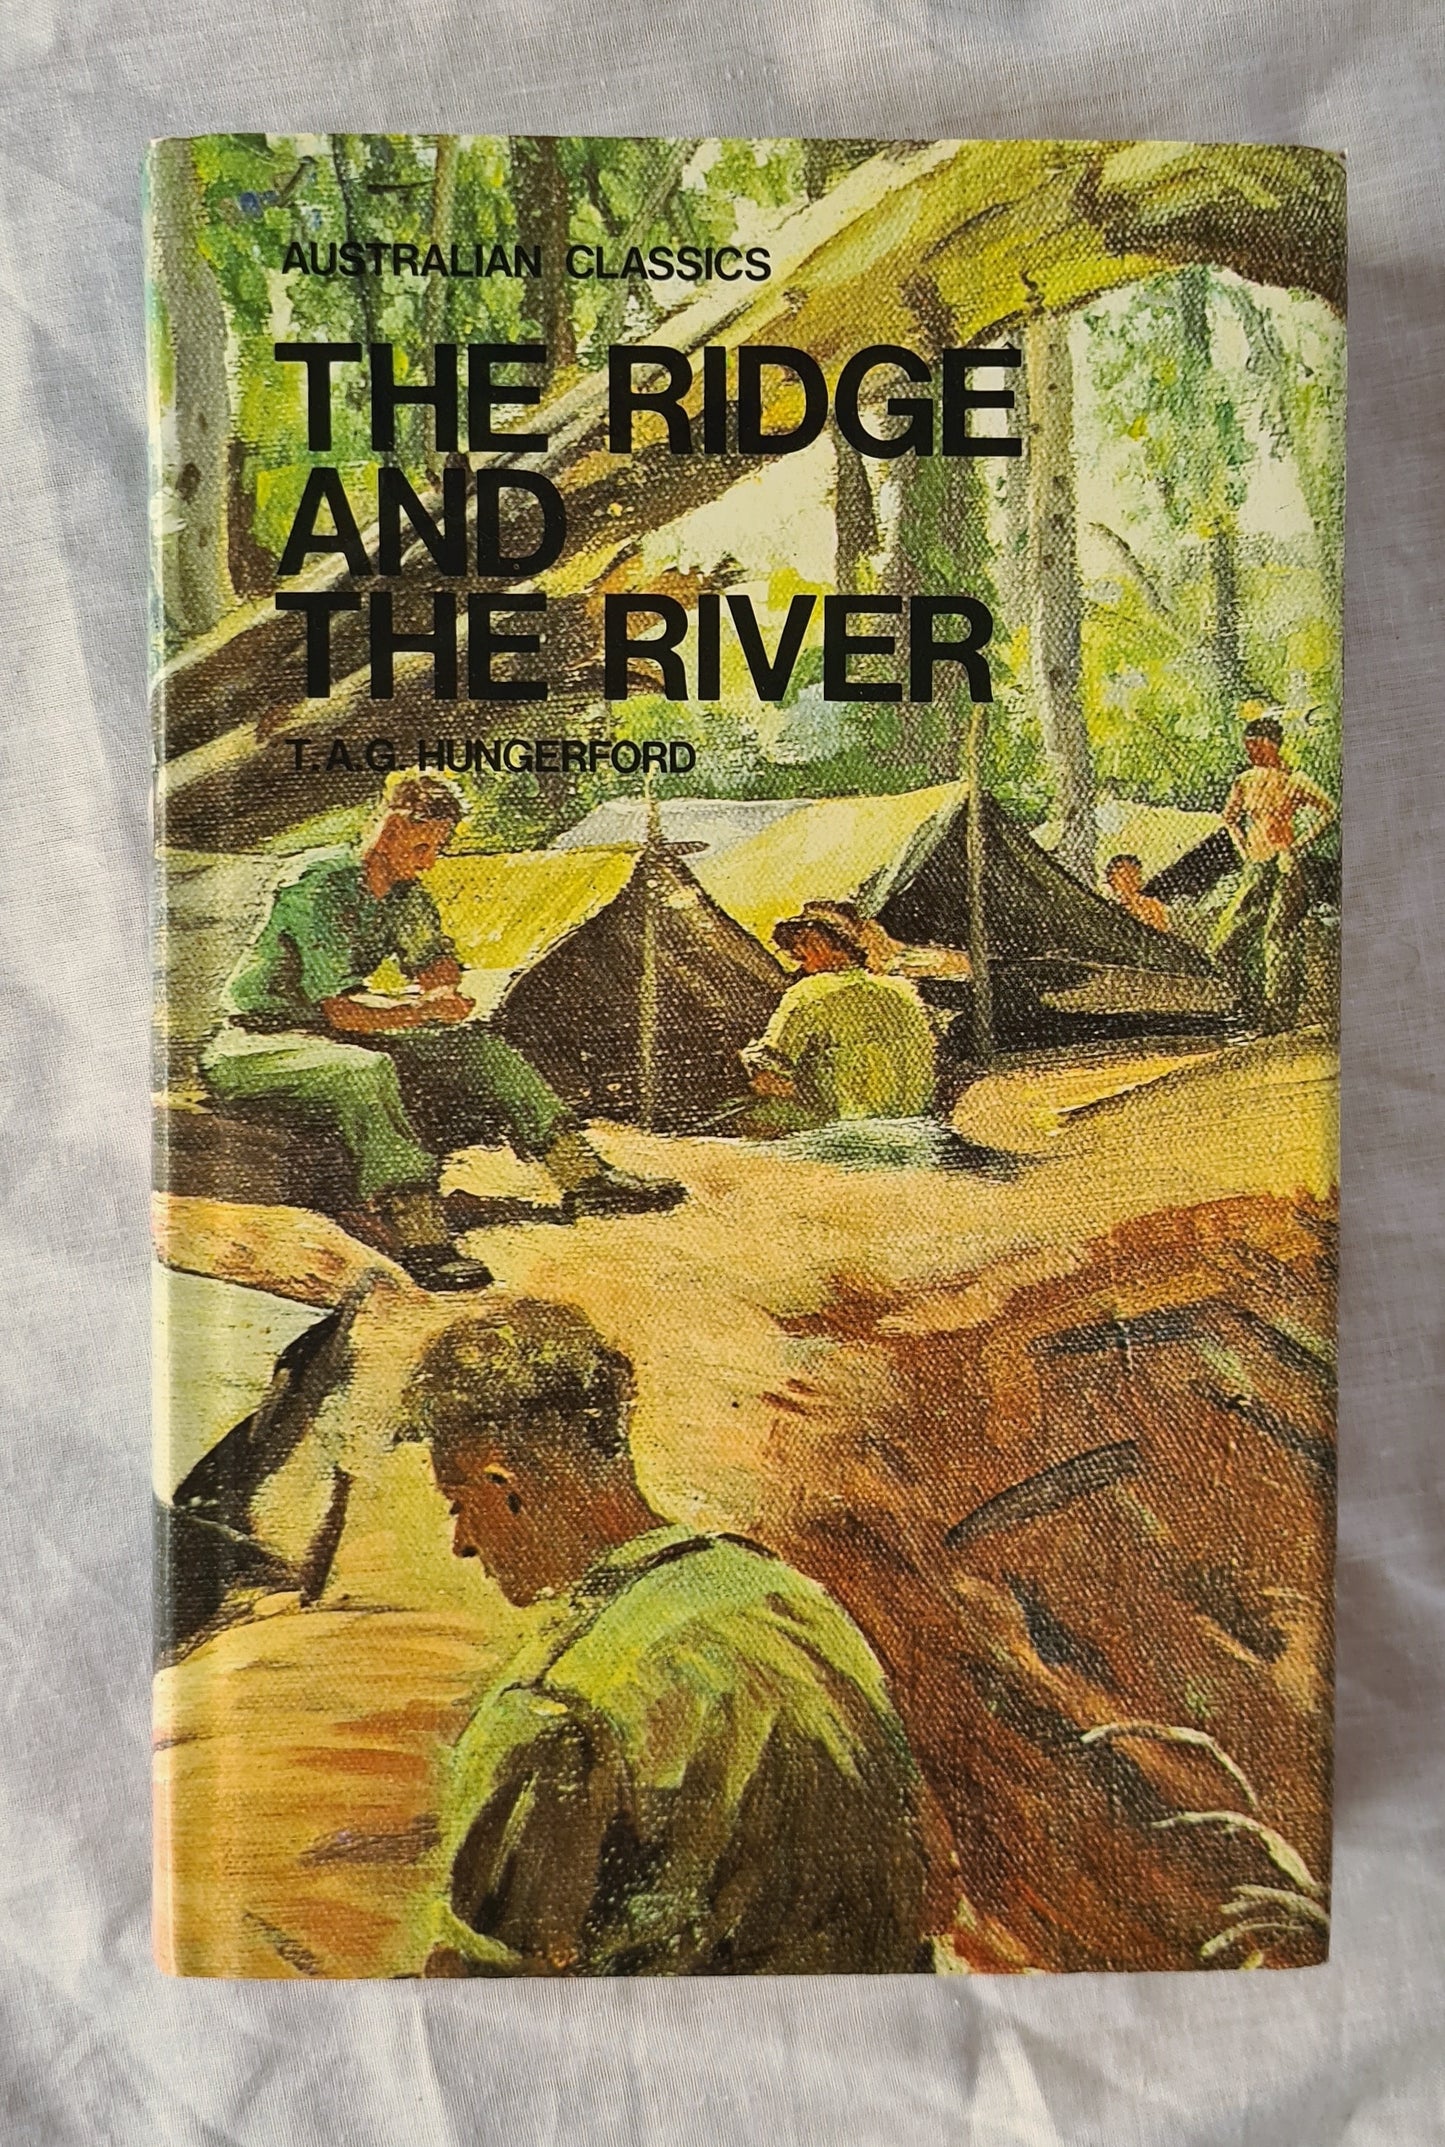 The Ridge and the River  by T. A. G. Hungerford  (Australian Classics)